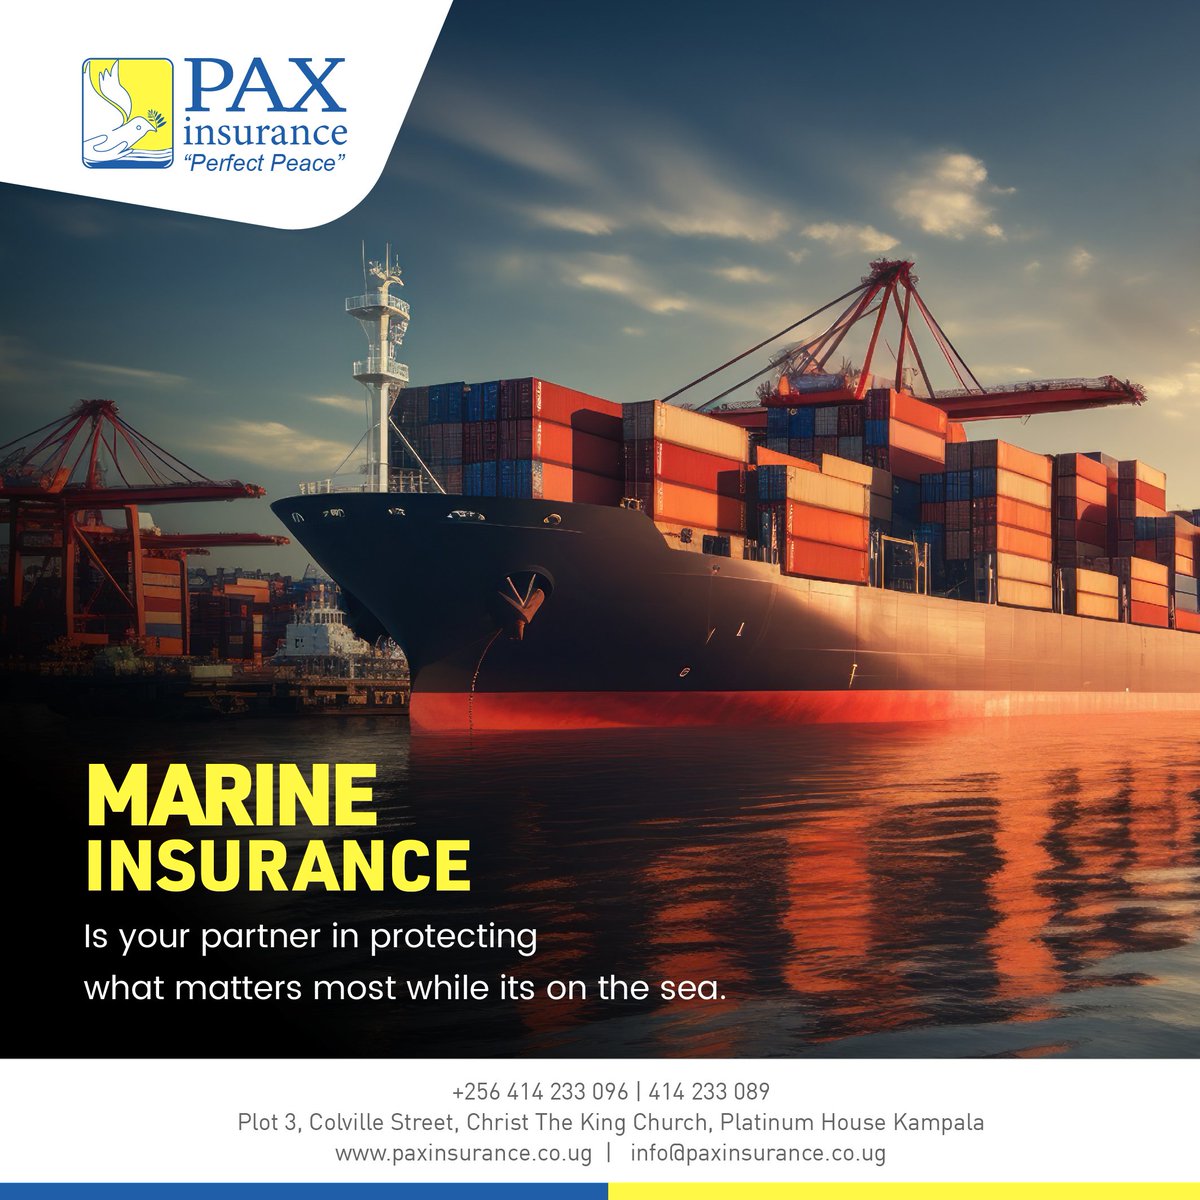 Whether it's smooth seas or rough waters, our #marineinsurance keeps your valuables secure at every turn.

#Marinecargo #MarinecargoInsurance #insurance #Riskmanagement